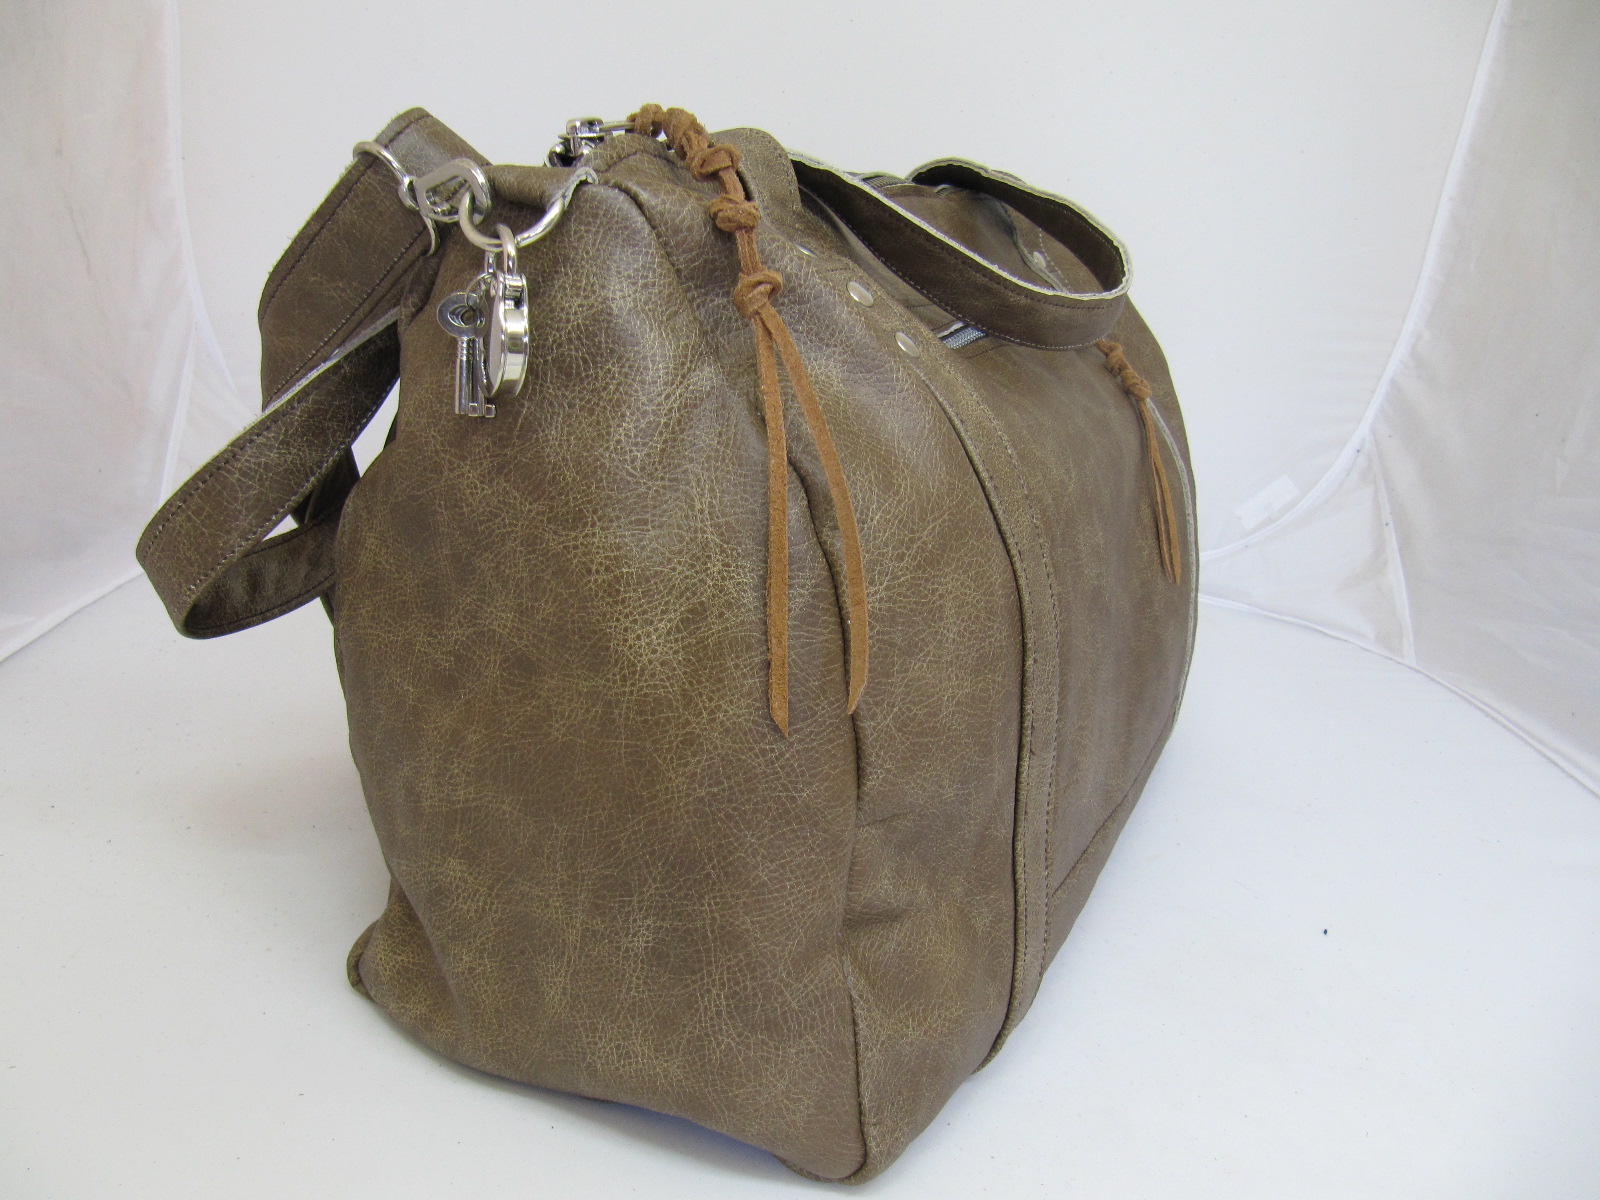 Overnight bag in light vintage leather and silver clips and zips.